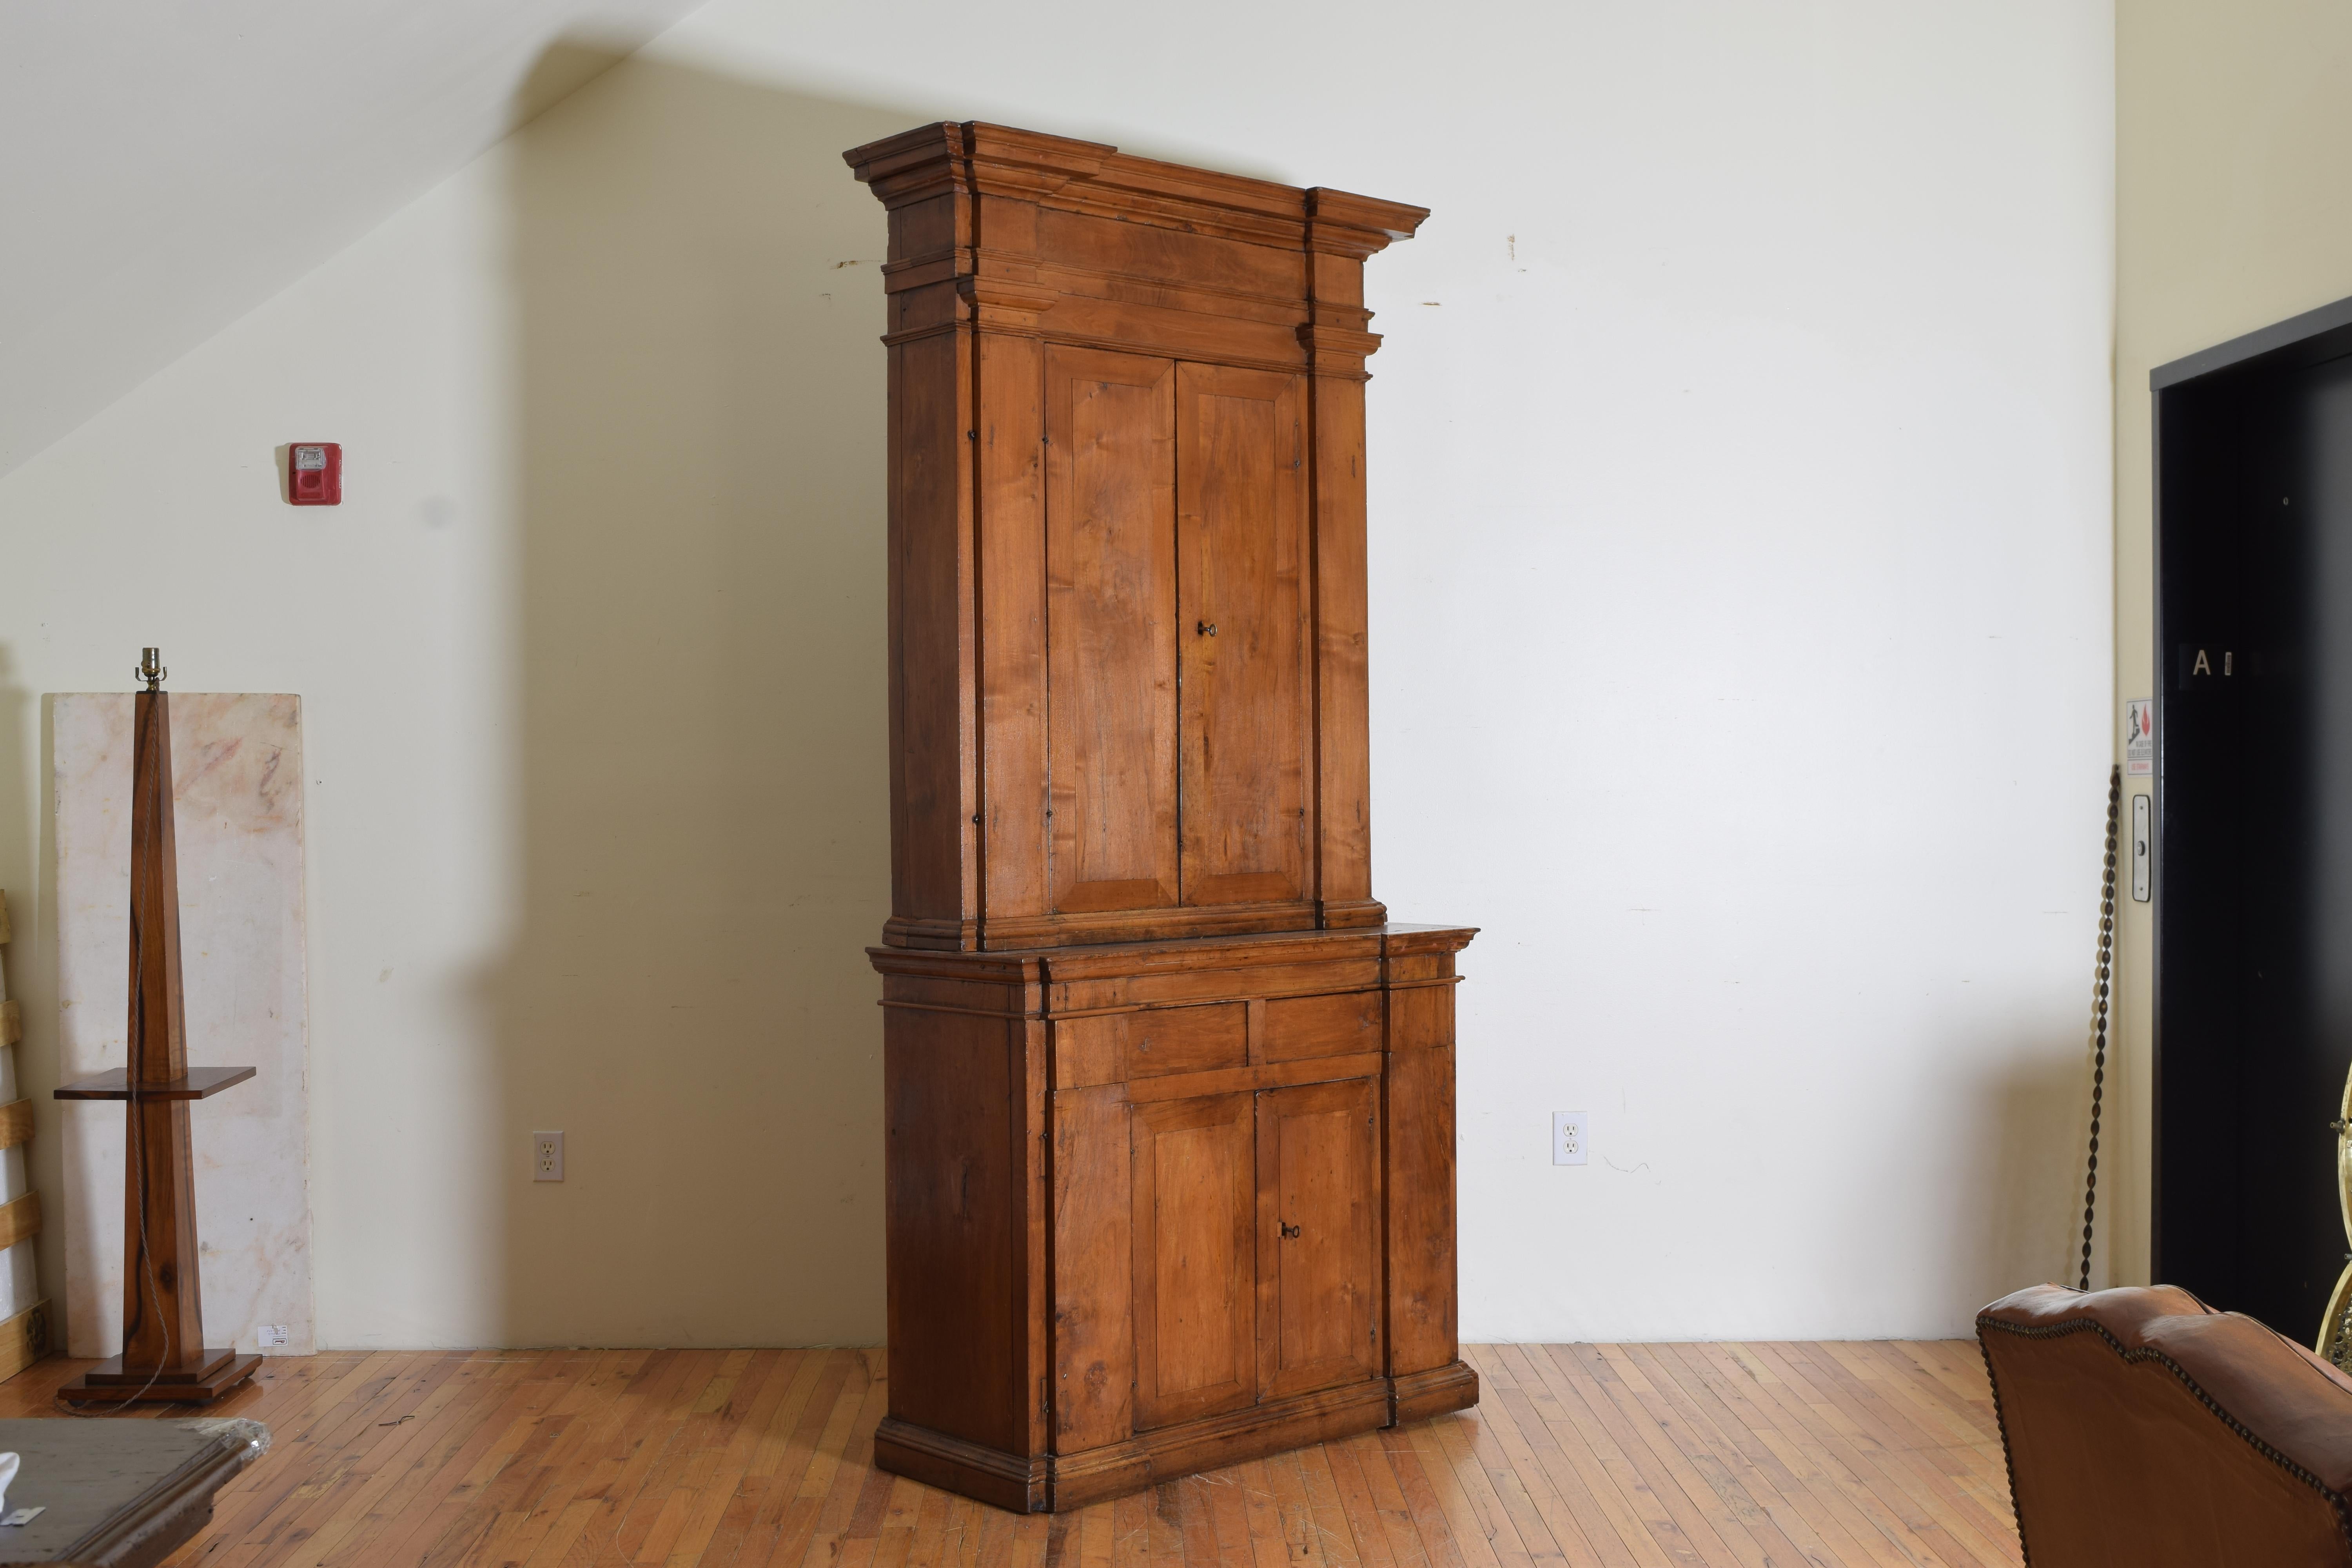 Hand Carved in light walnut and cleverly constructed for the many secretive spaces it hides. The top piece has two doors with interior shelves flanked by two panels that open to reveal more storage space. Below is a lower cabinet functioning the